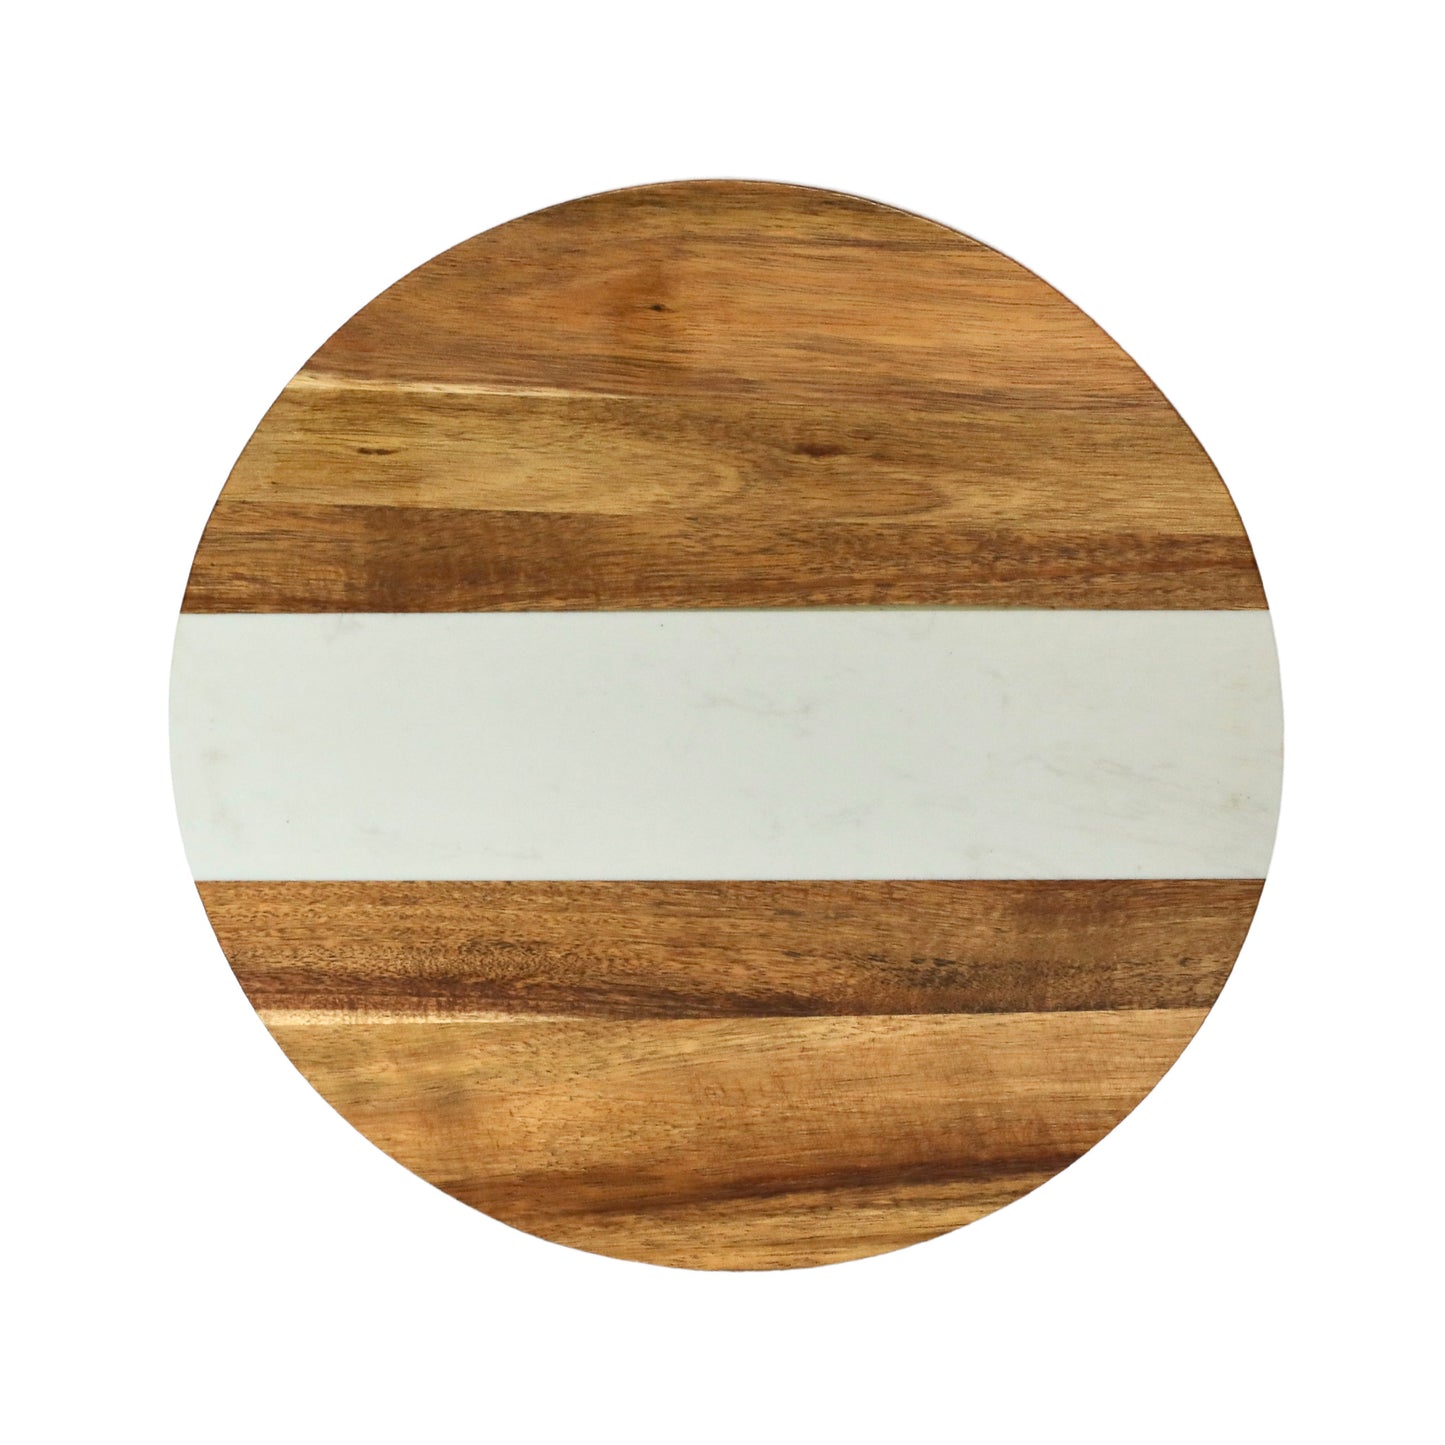 White Marble and Acacia Wood Round Board - 11"